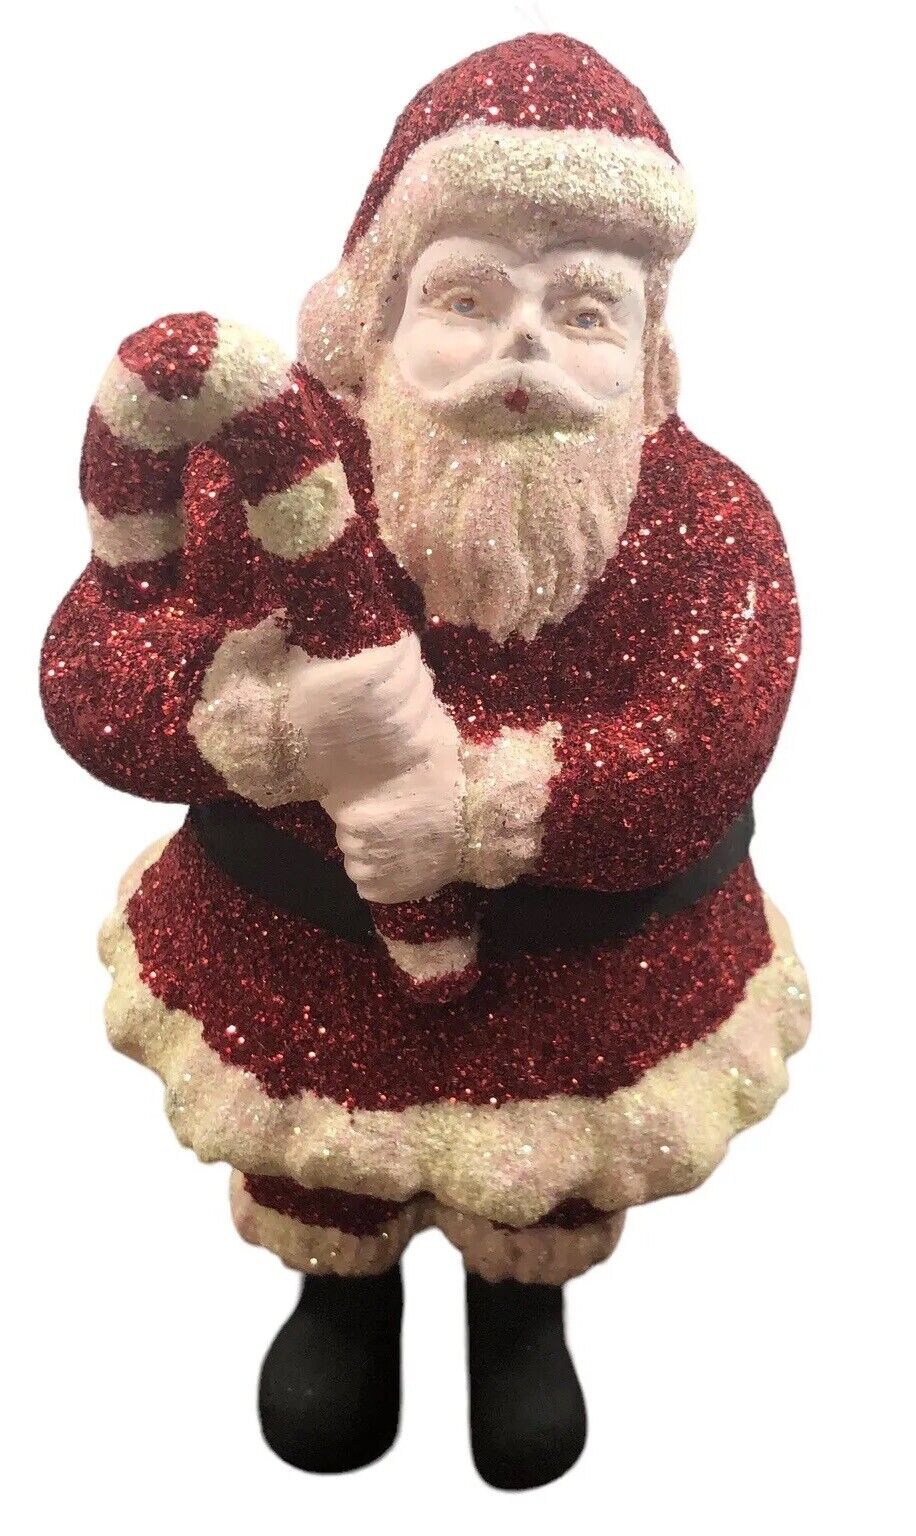 Vintage Style Christmas Paper Mache Santa Claus Covered In Glitter Large & Shiny